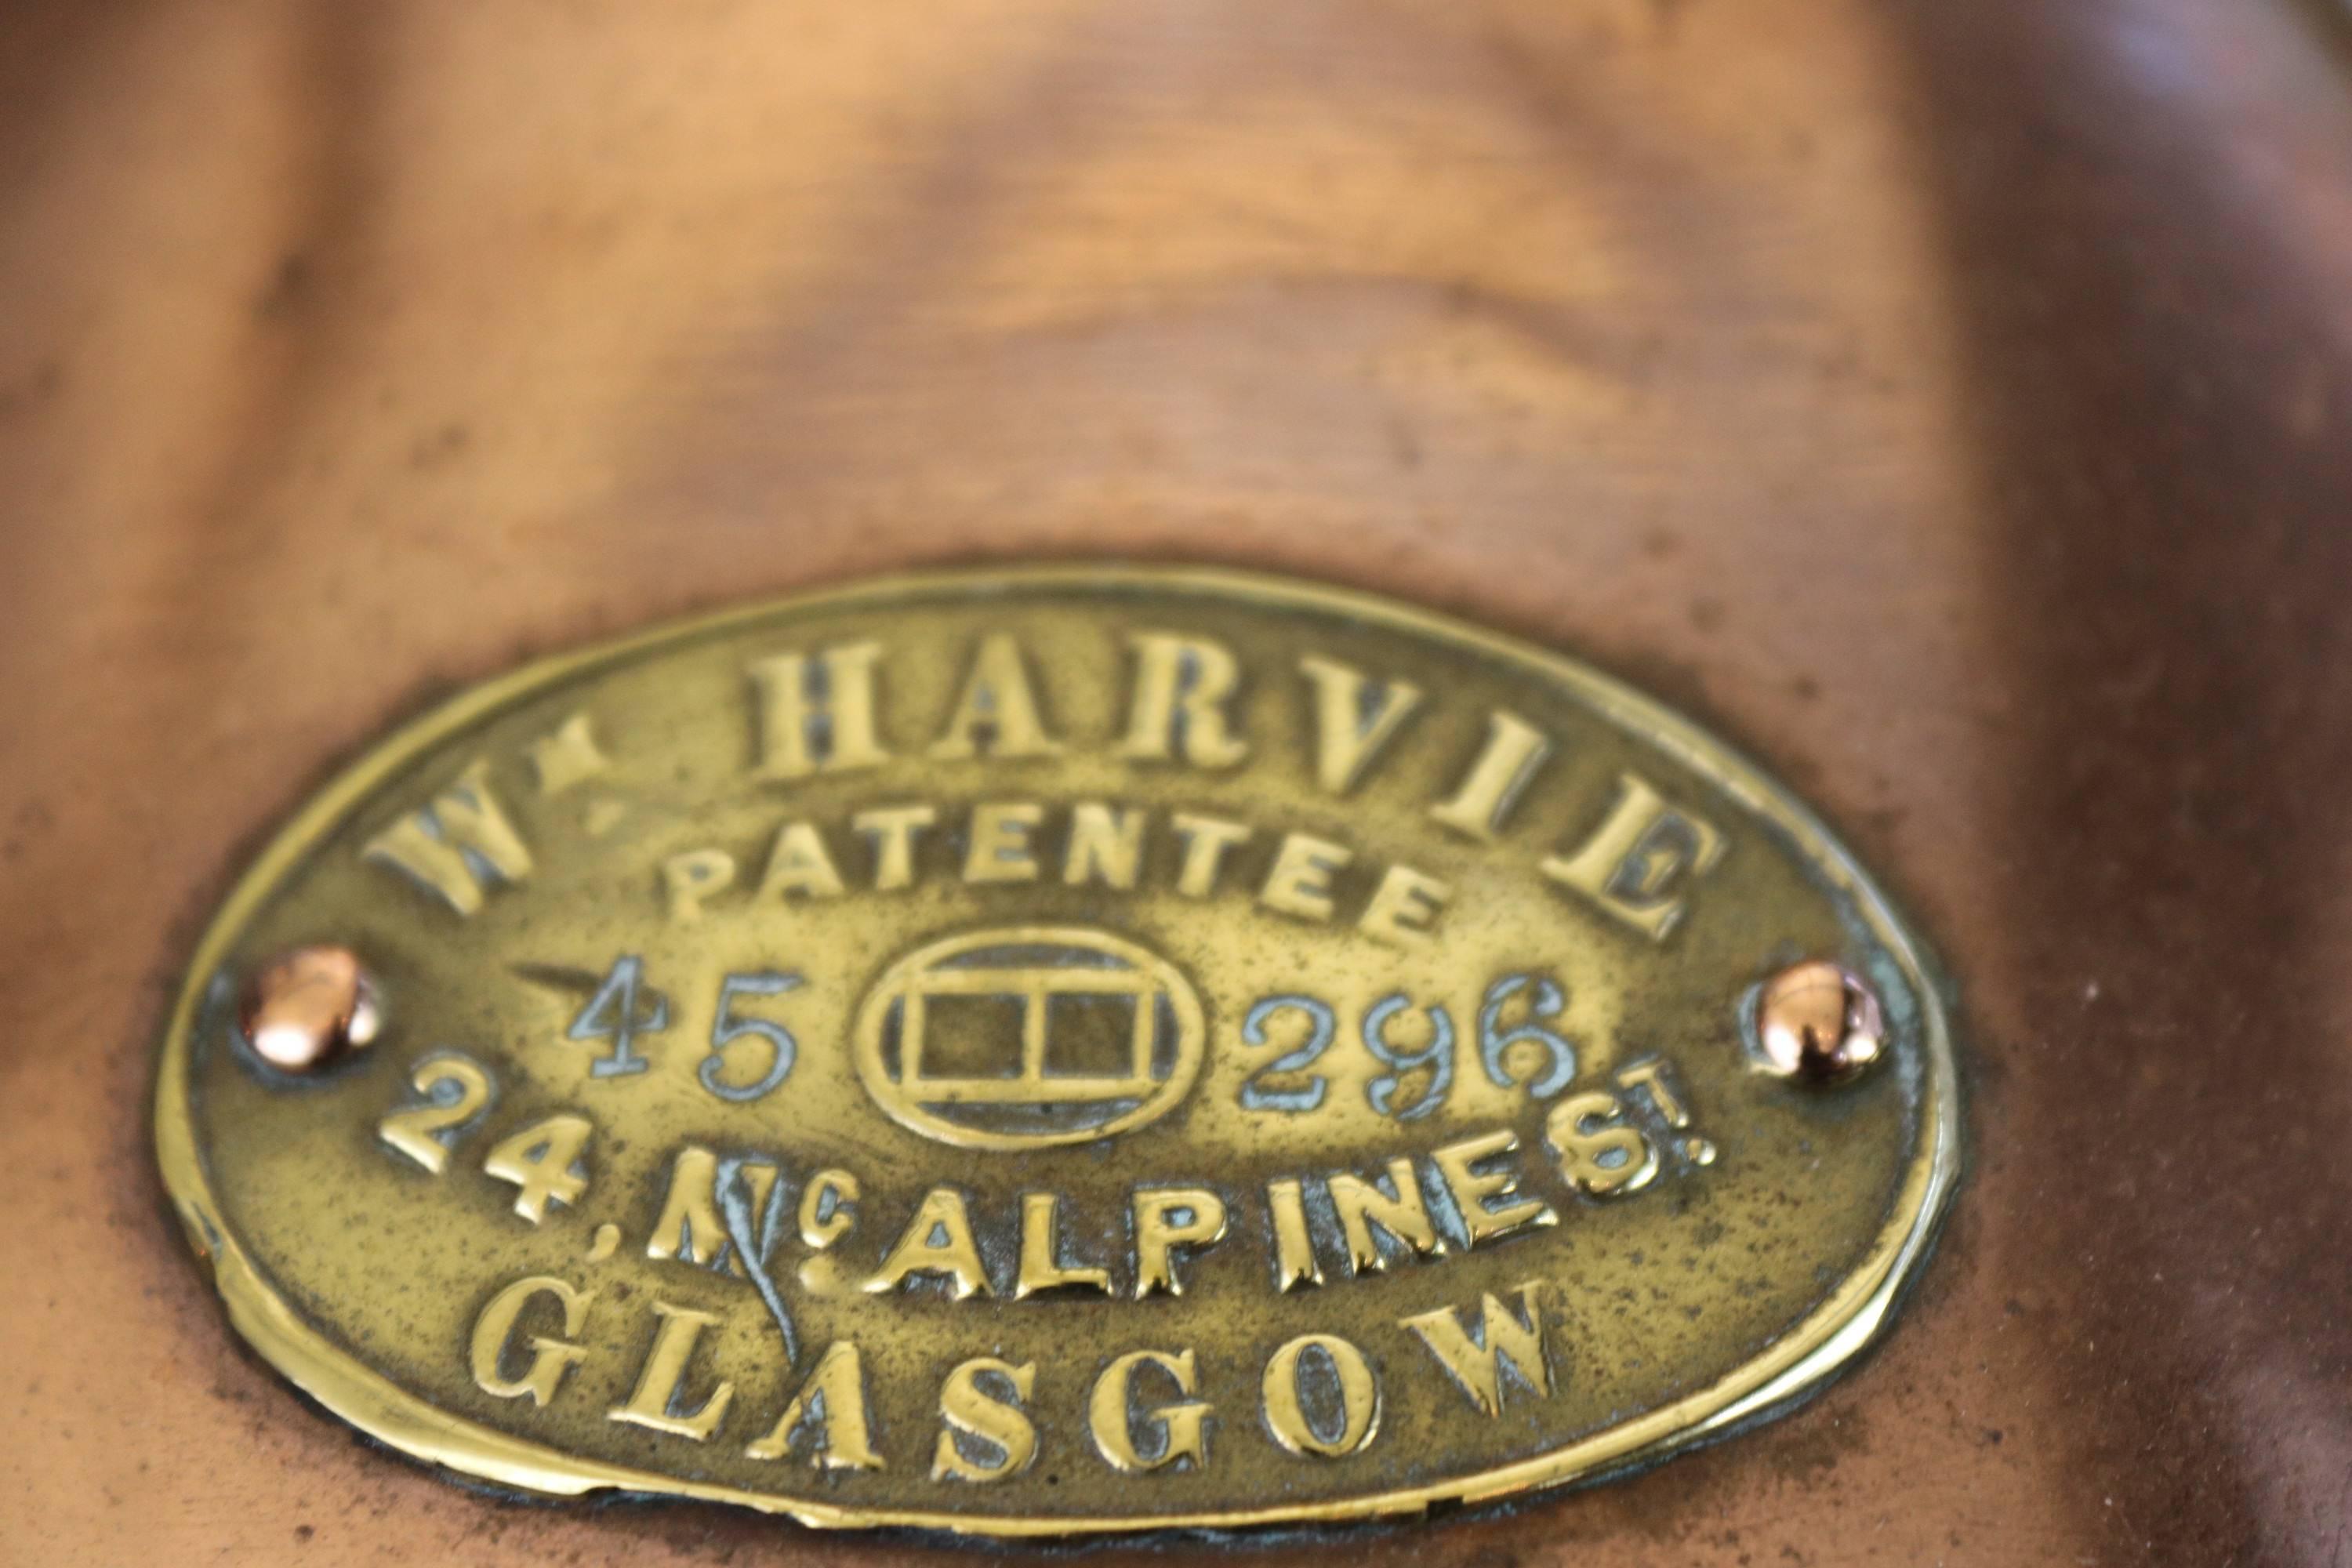 Solid copper and brass starboard ship's lantern. Heavy fresnel glass lens. Brass maker's badge from William Harvie, 24 Alpine St. Glasgow. Brass carry handle, solid brass hinges on top with knurled knob. Measures: 27 x 11 x 12.